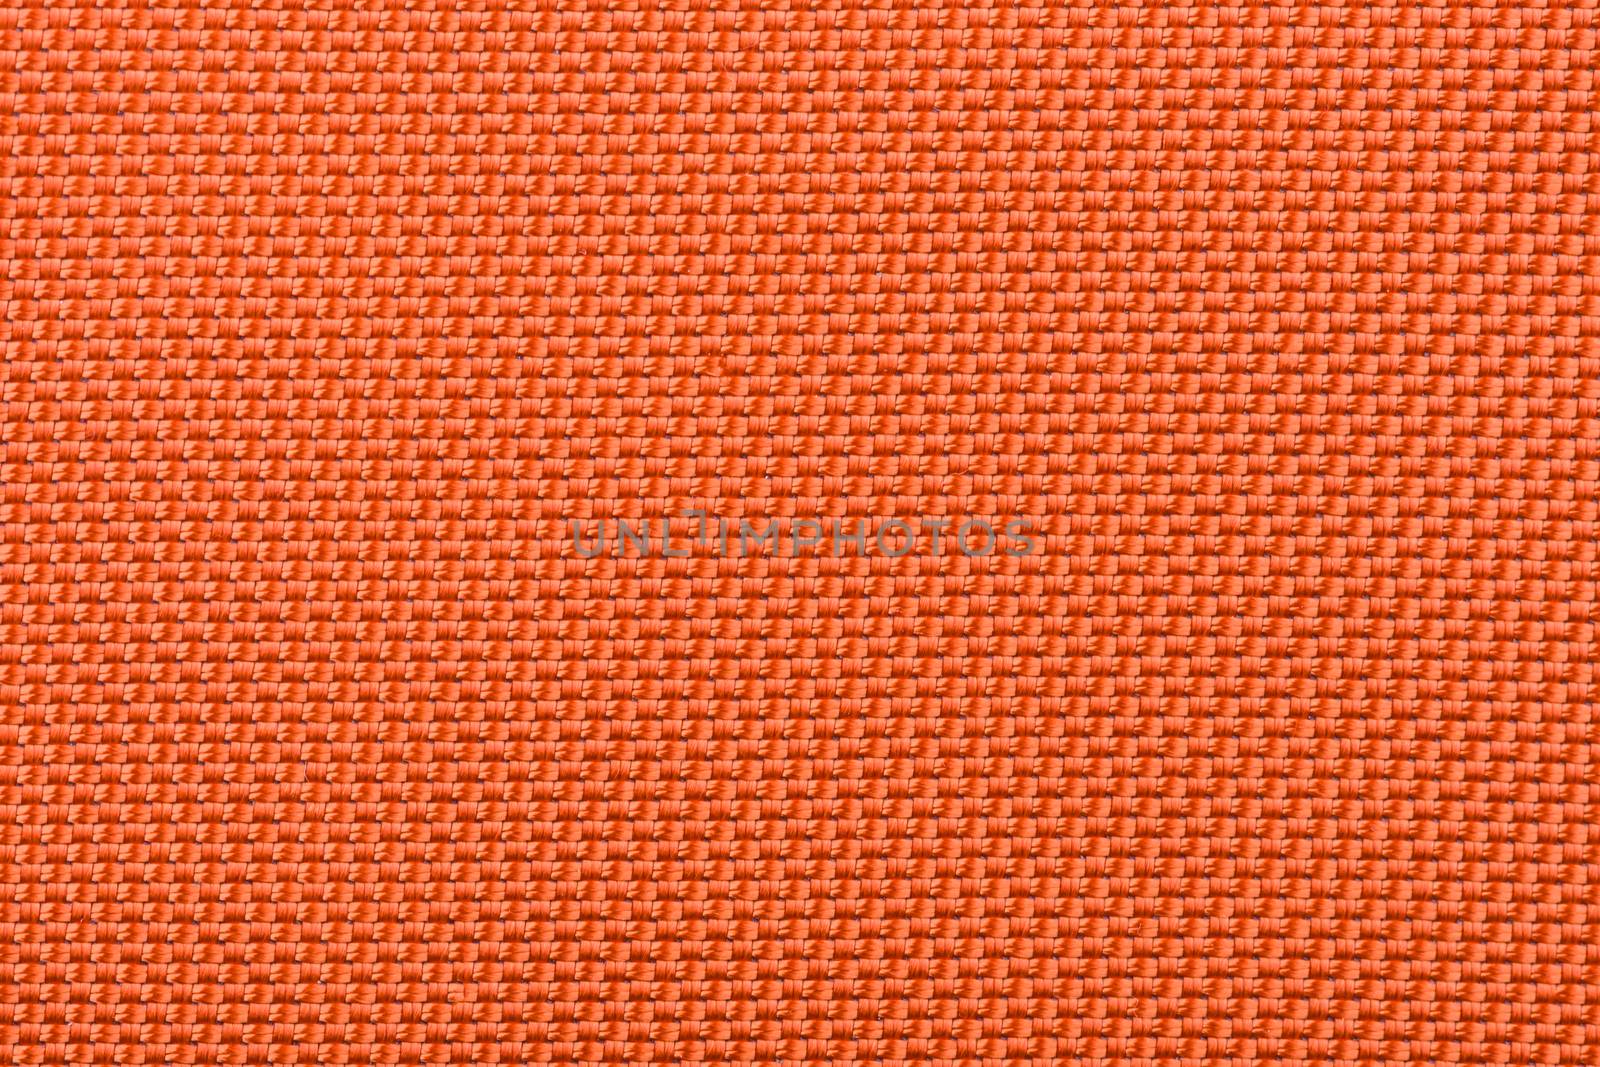 A macro shot of a very tightly woven orange fabric.